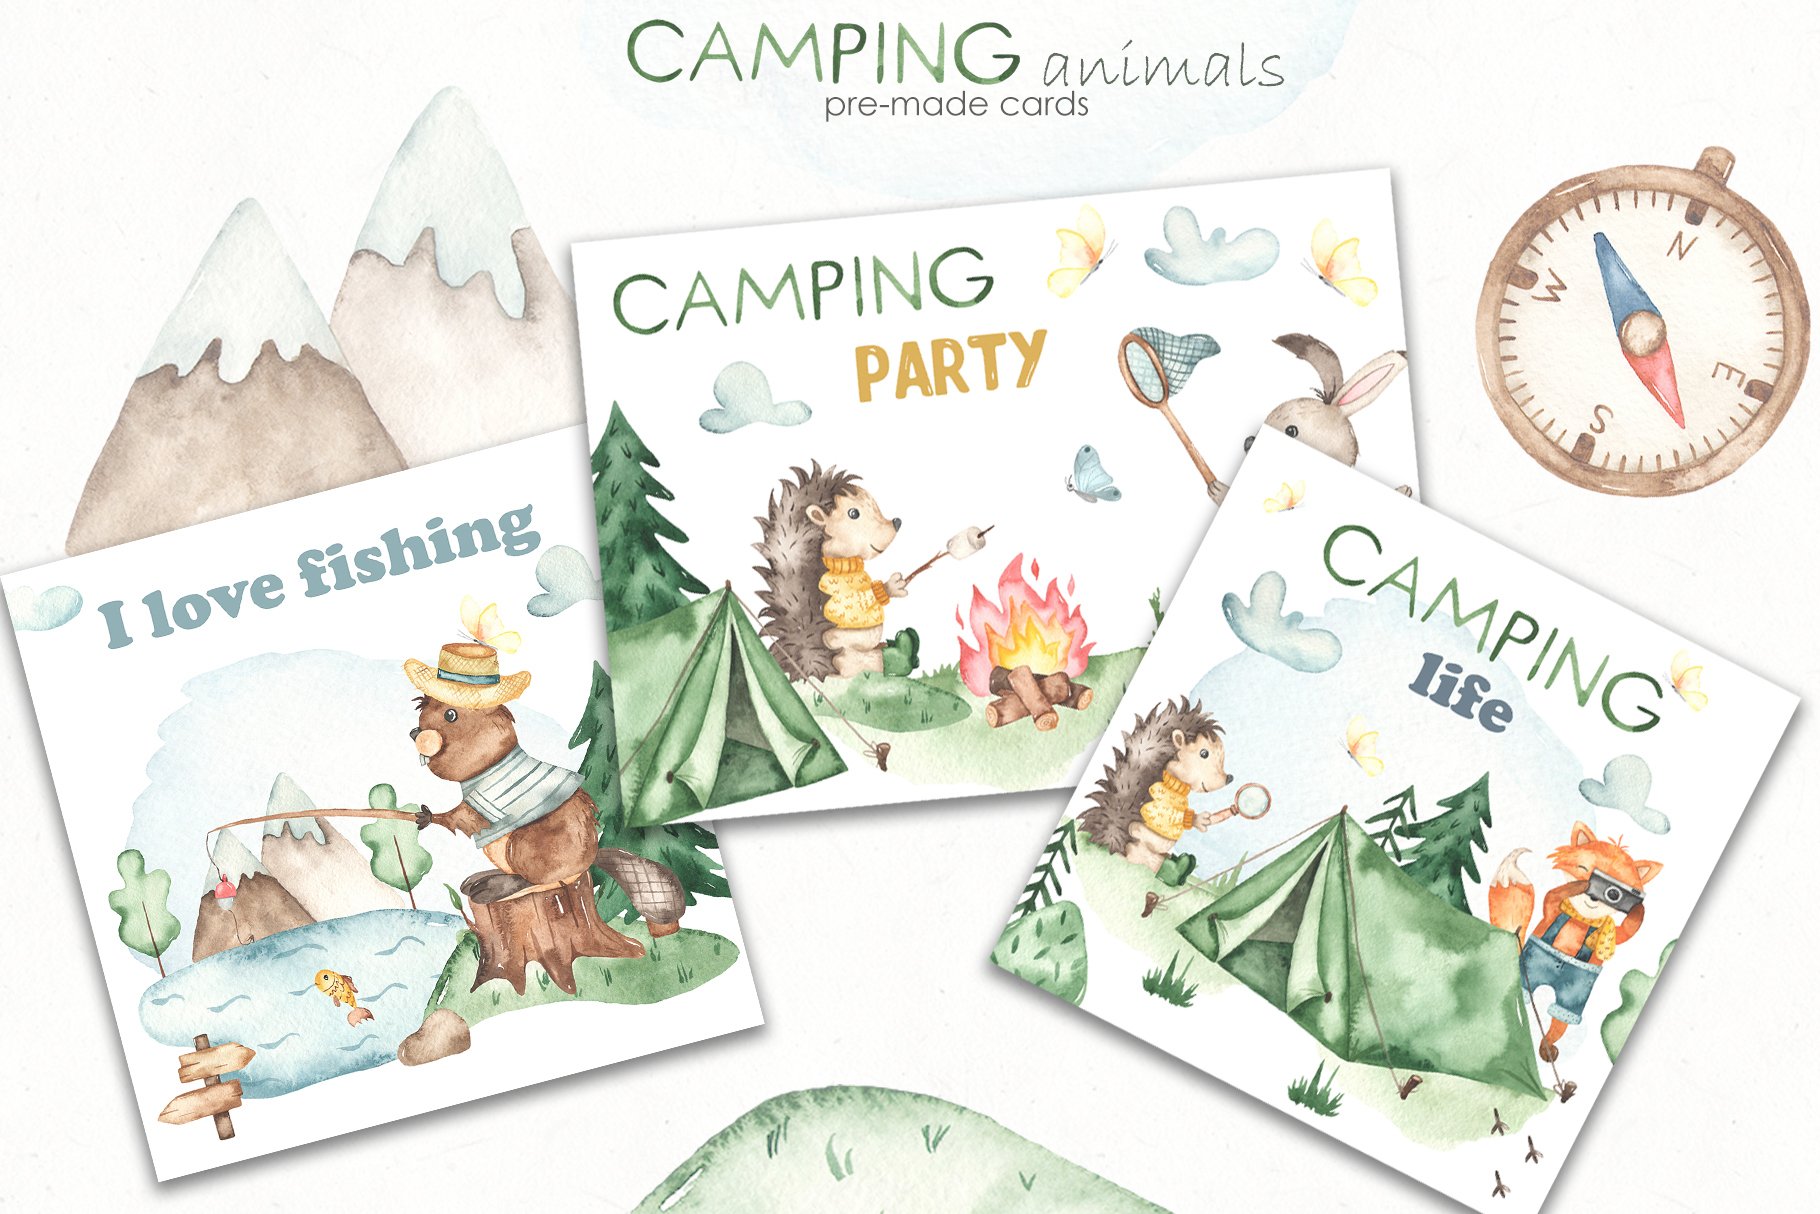 Nice invitations in a camping style.